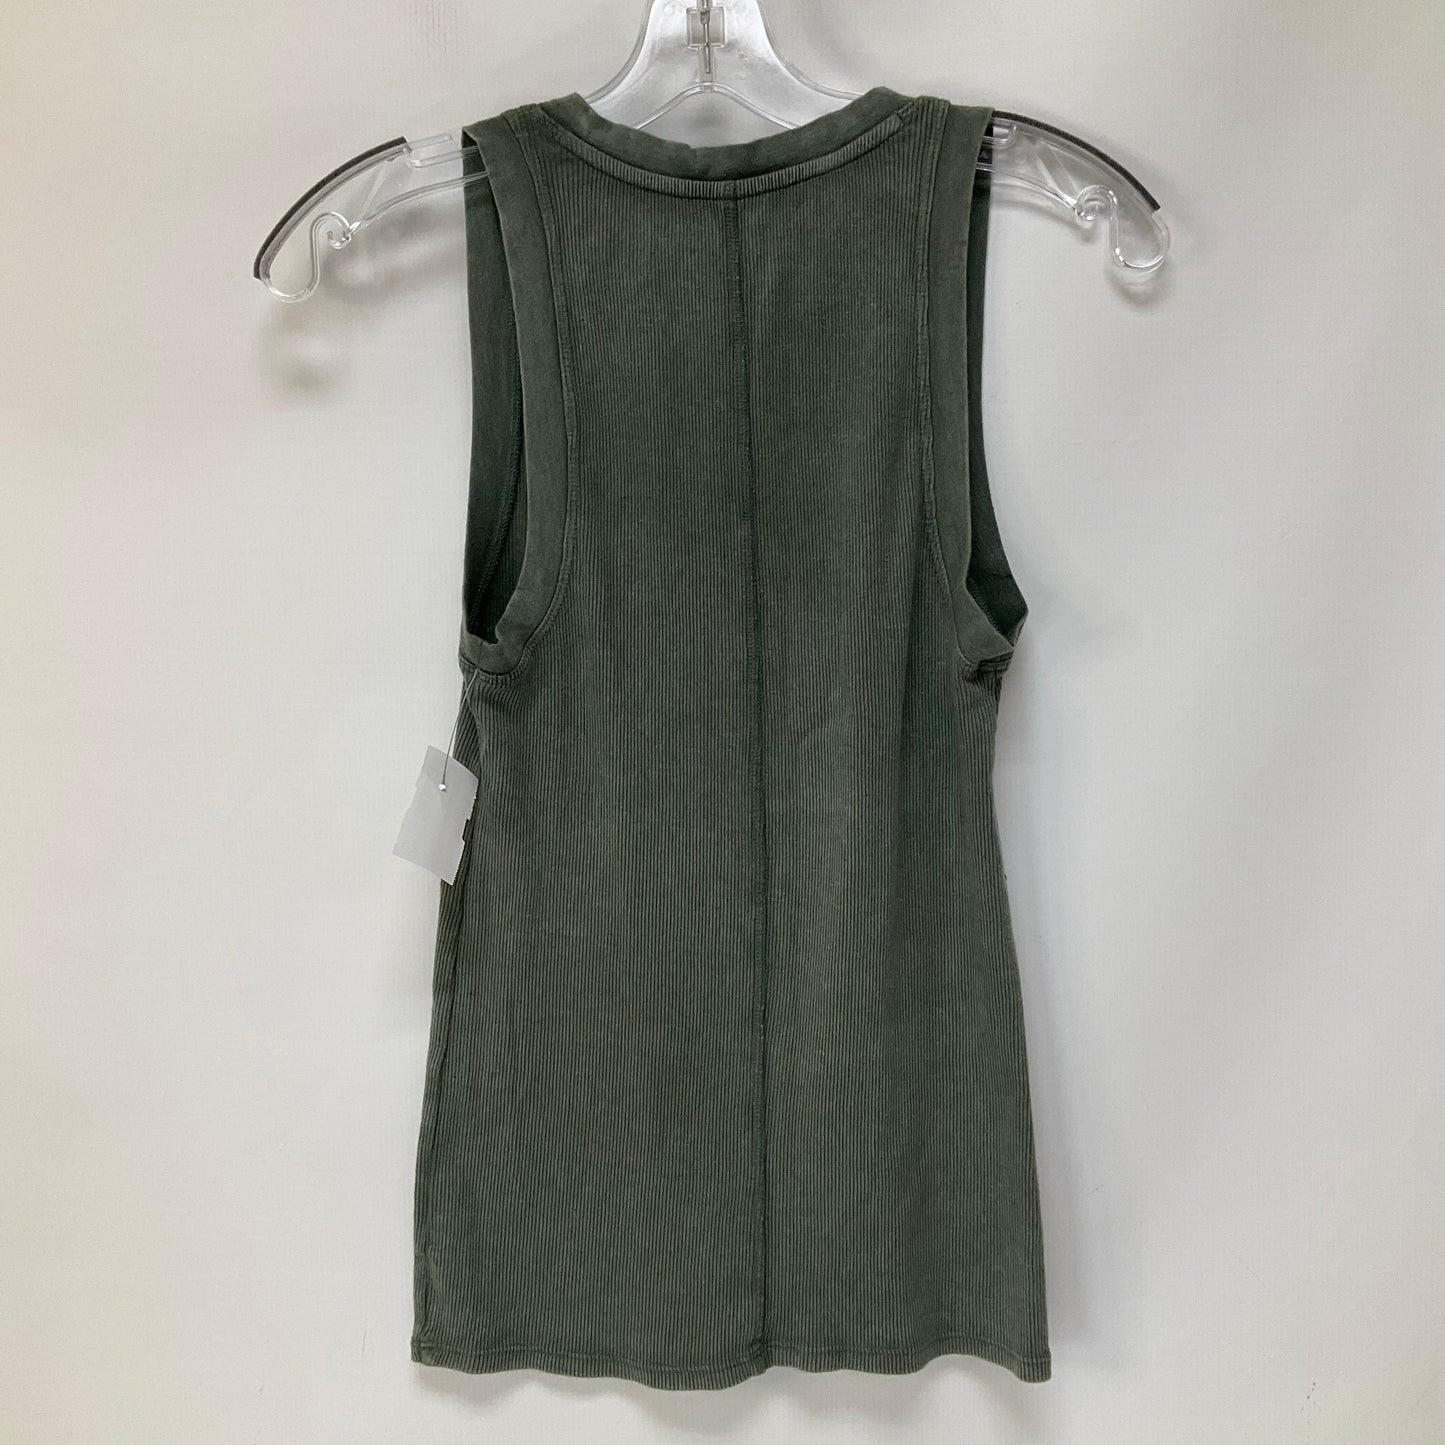 Green Tank Top Aerie, Size S